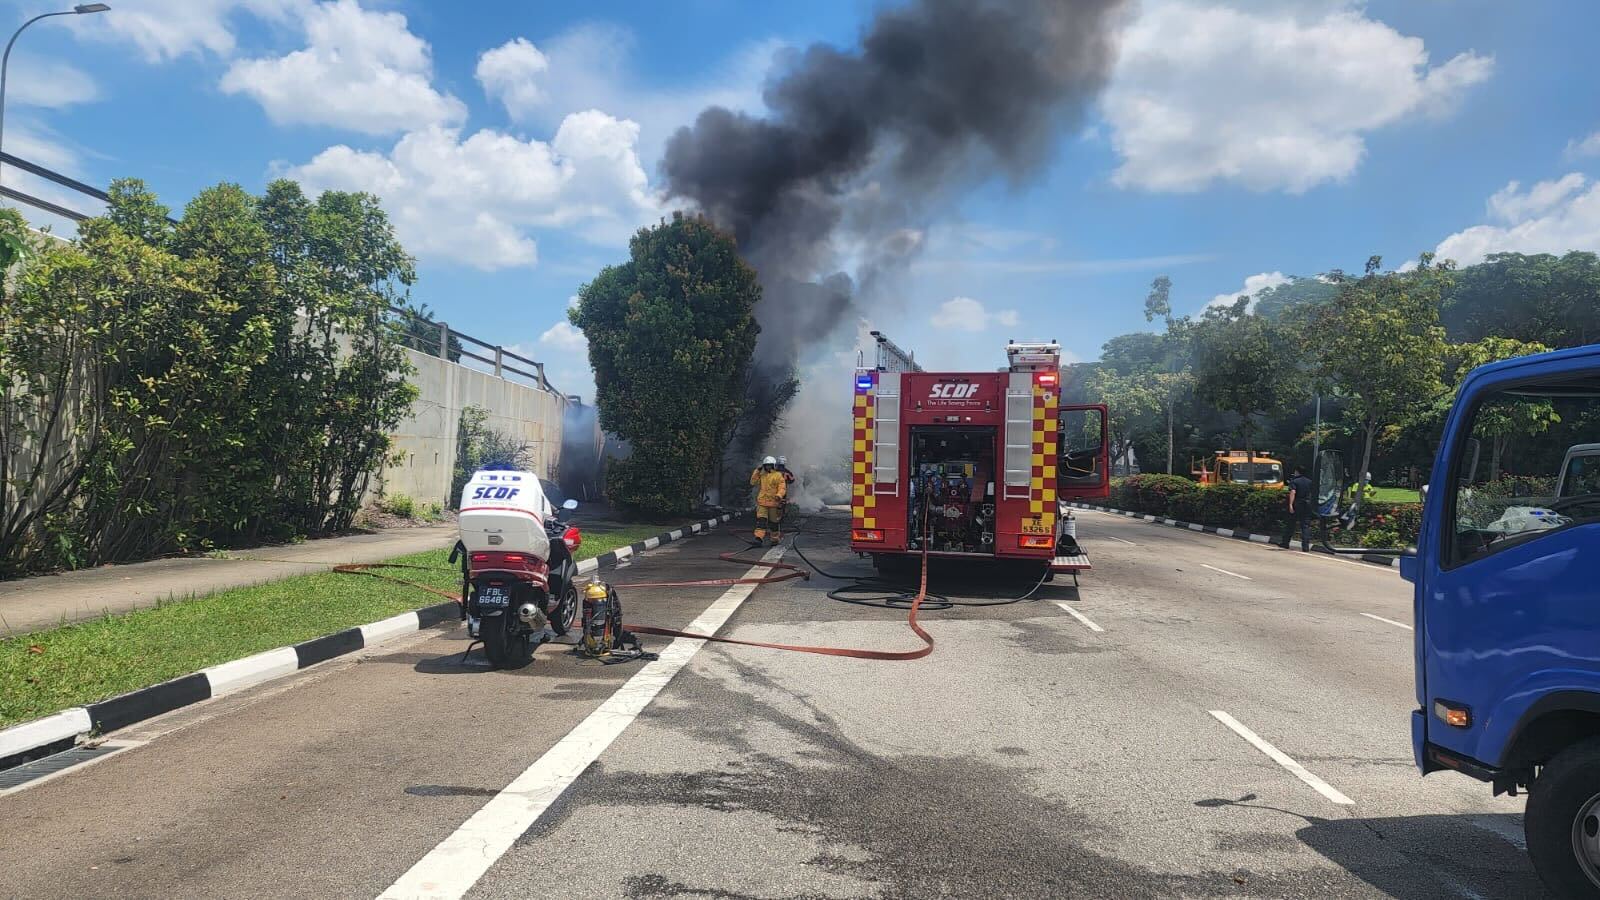 SCDF had been alerted to the burning truck at around 11.50am and had extinguished the fire using a water jet.